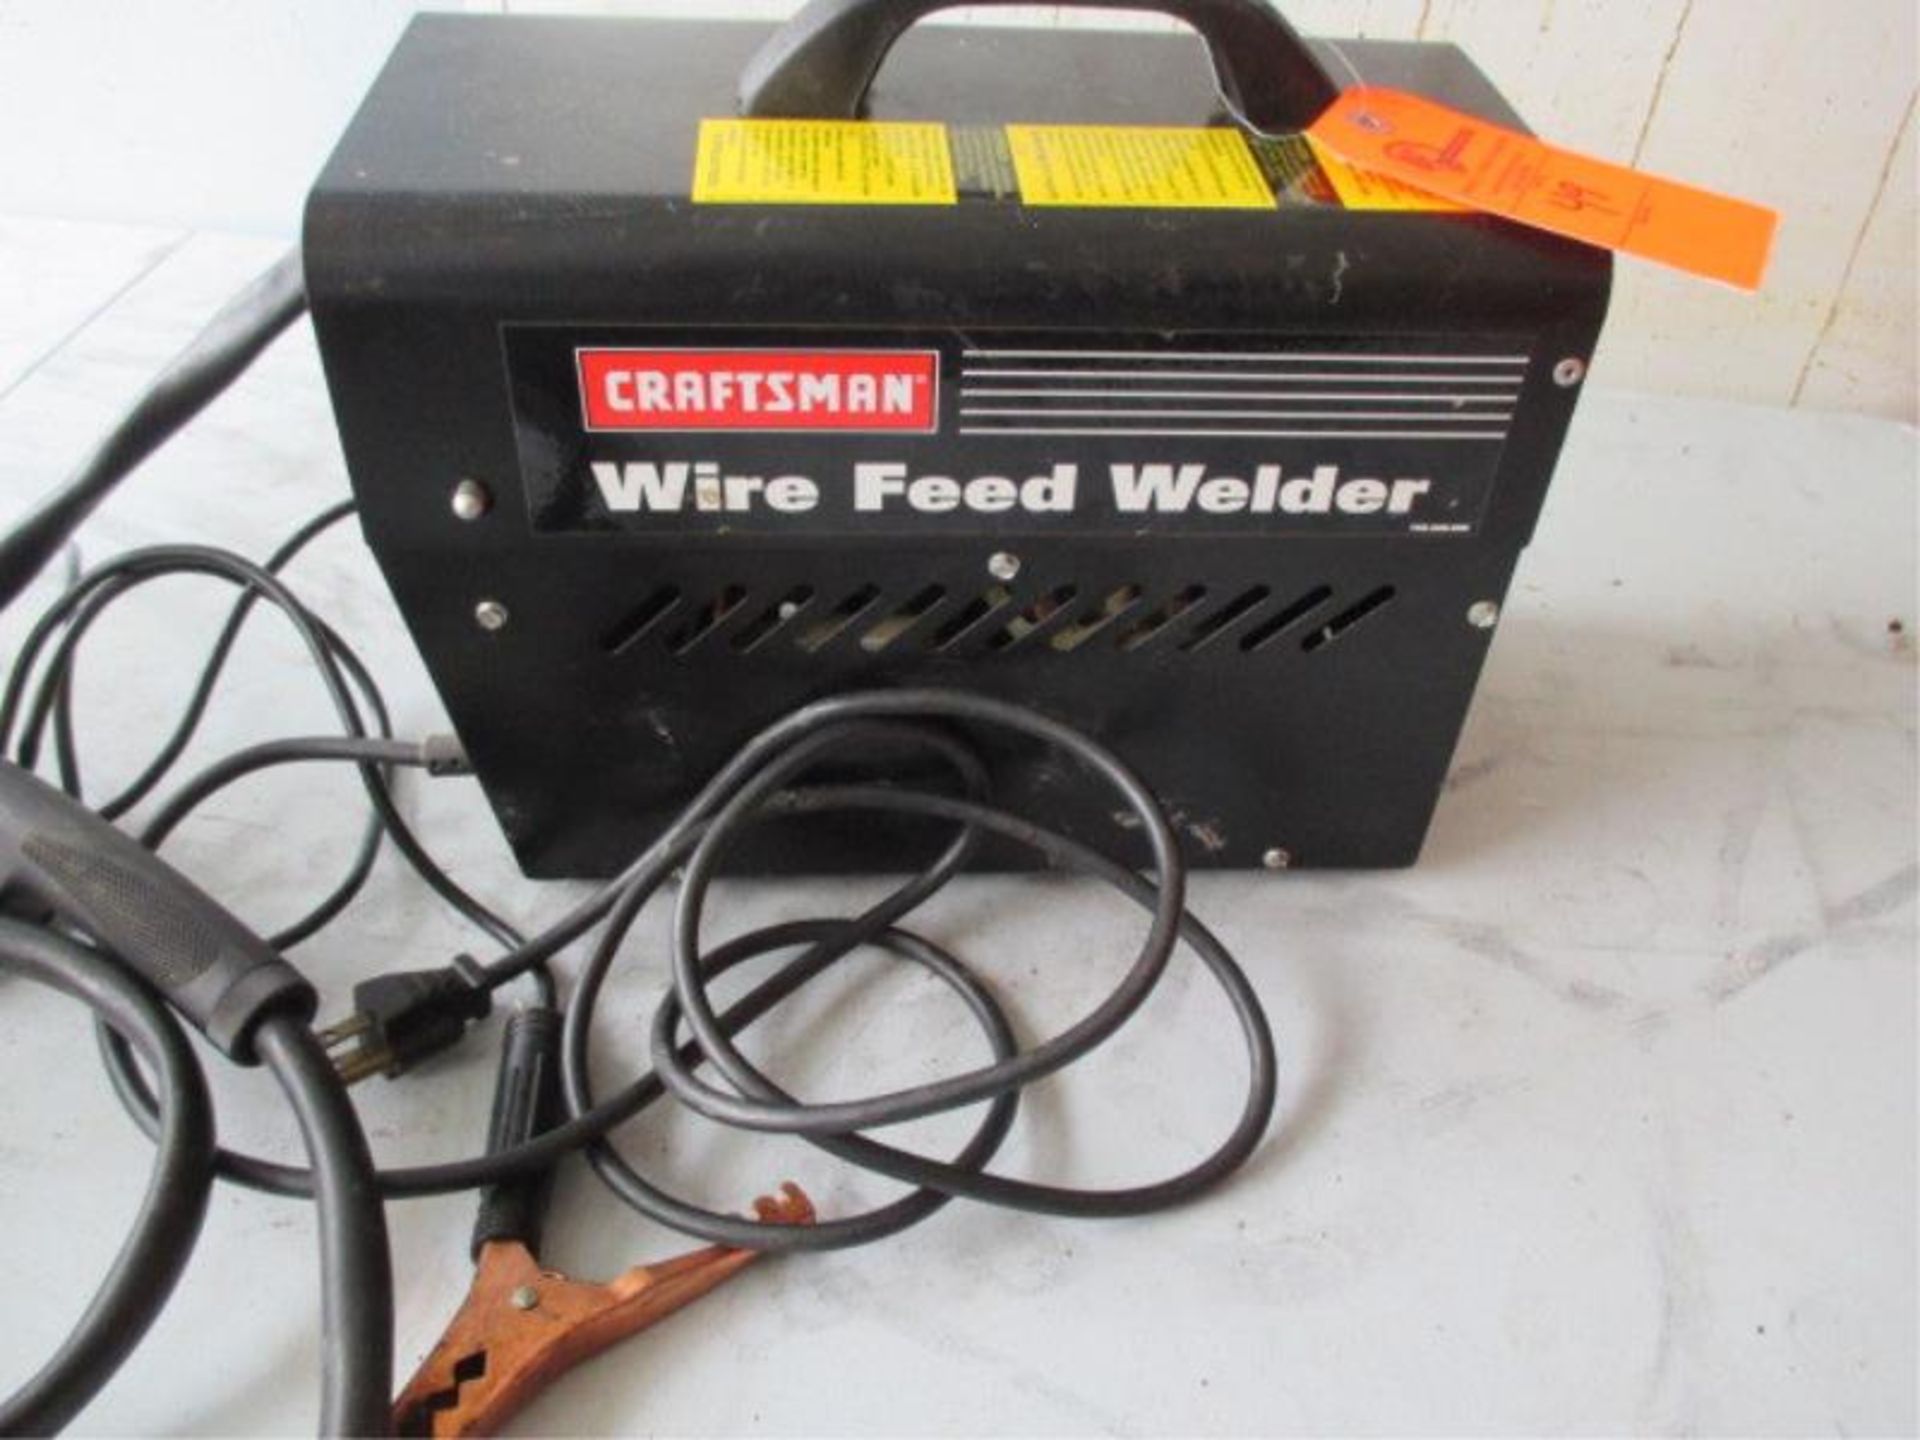 Craftsman Wire Feed Welder, Model: 920101, 80 Amp Gasless, 120 Volt, Plugs Into Standard Household - Image 5 of 6